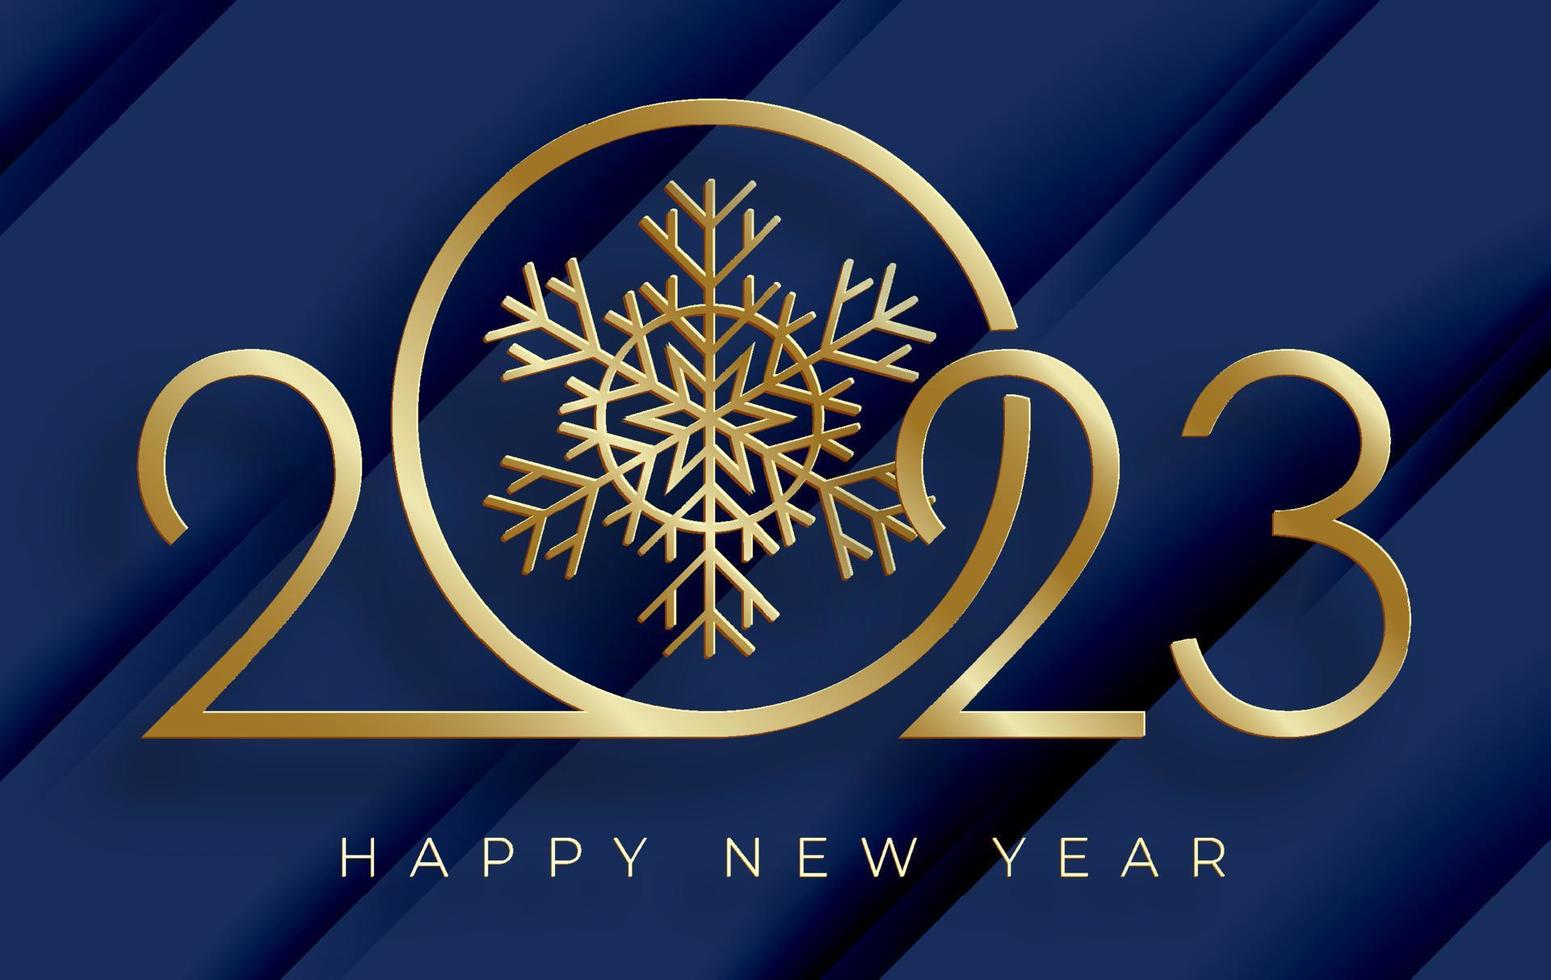 Happy New Year 2023 Vector Image, Wallpaper Greeting Cards